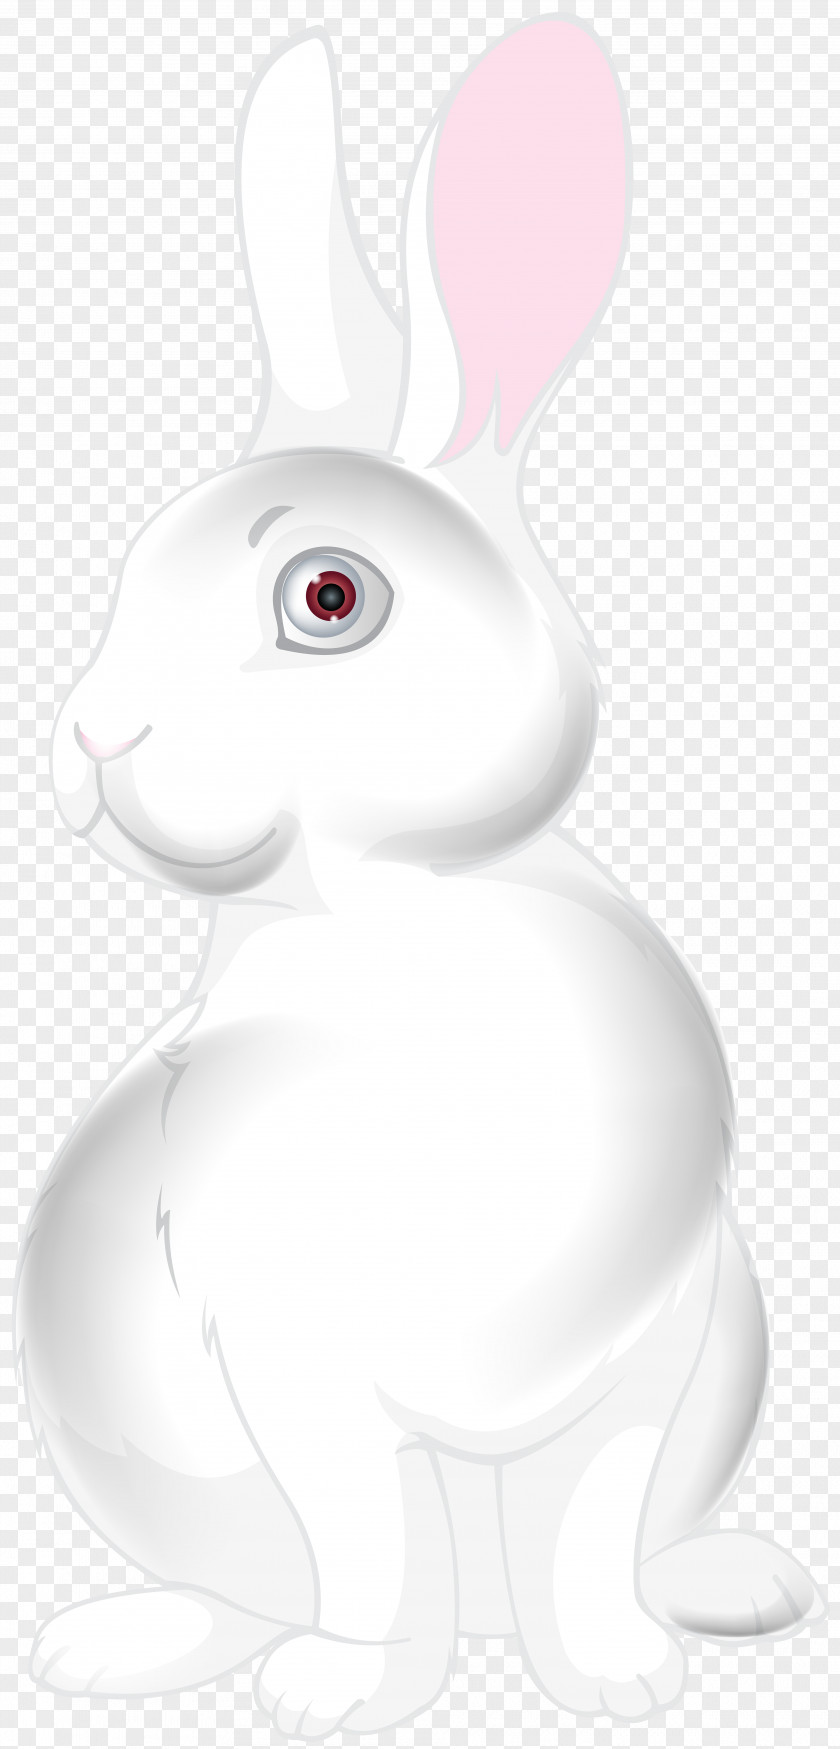 Rabbit Domestic Hare Easter Bunny Nose PNG